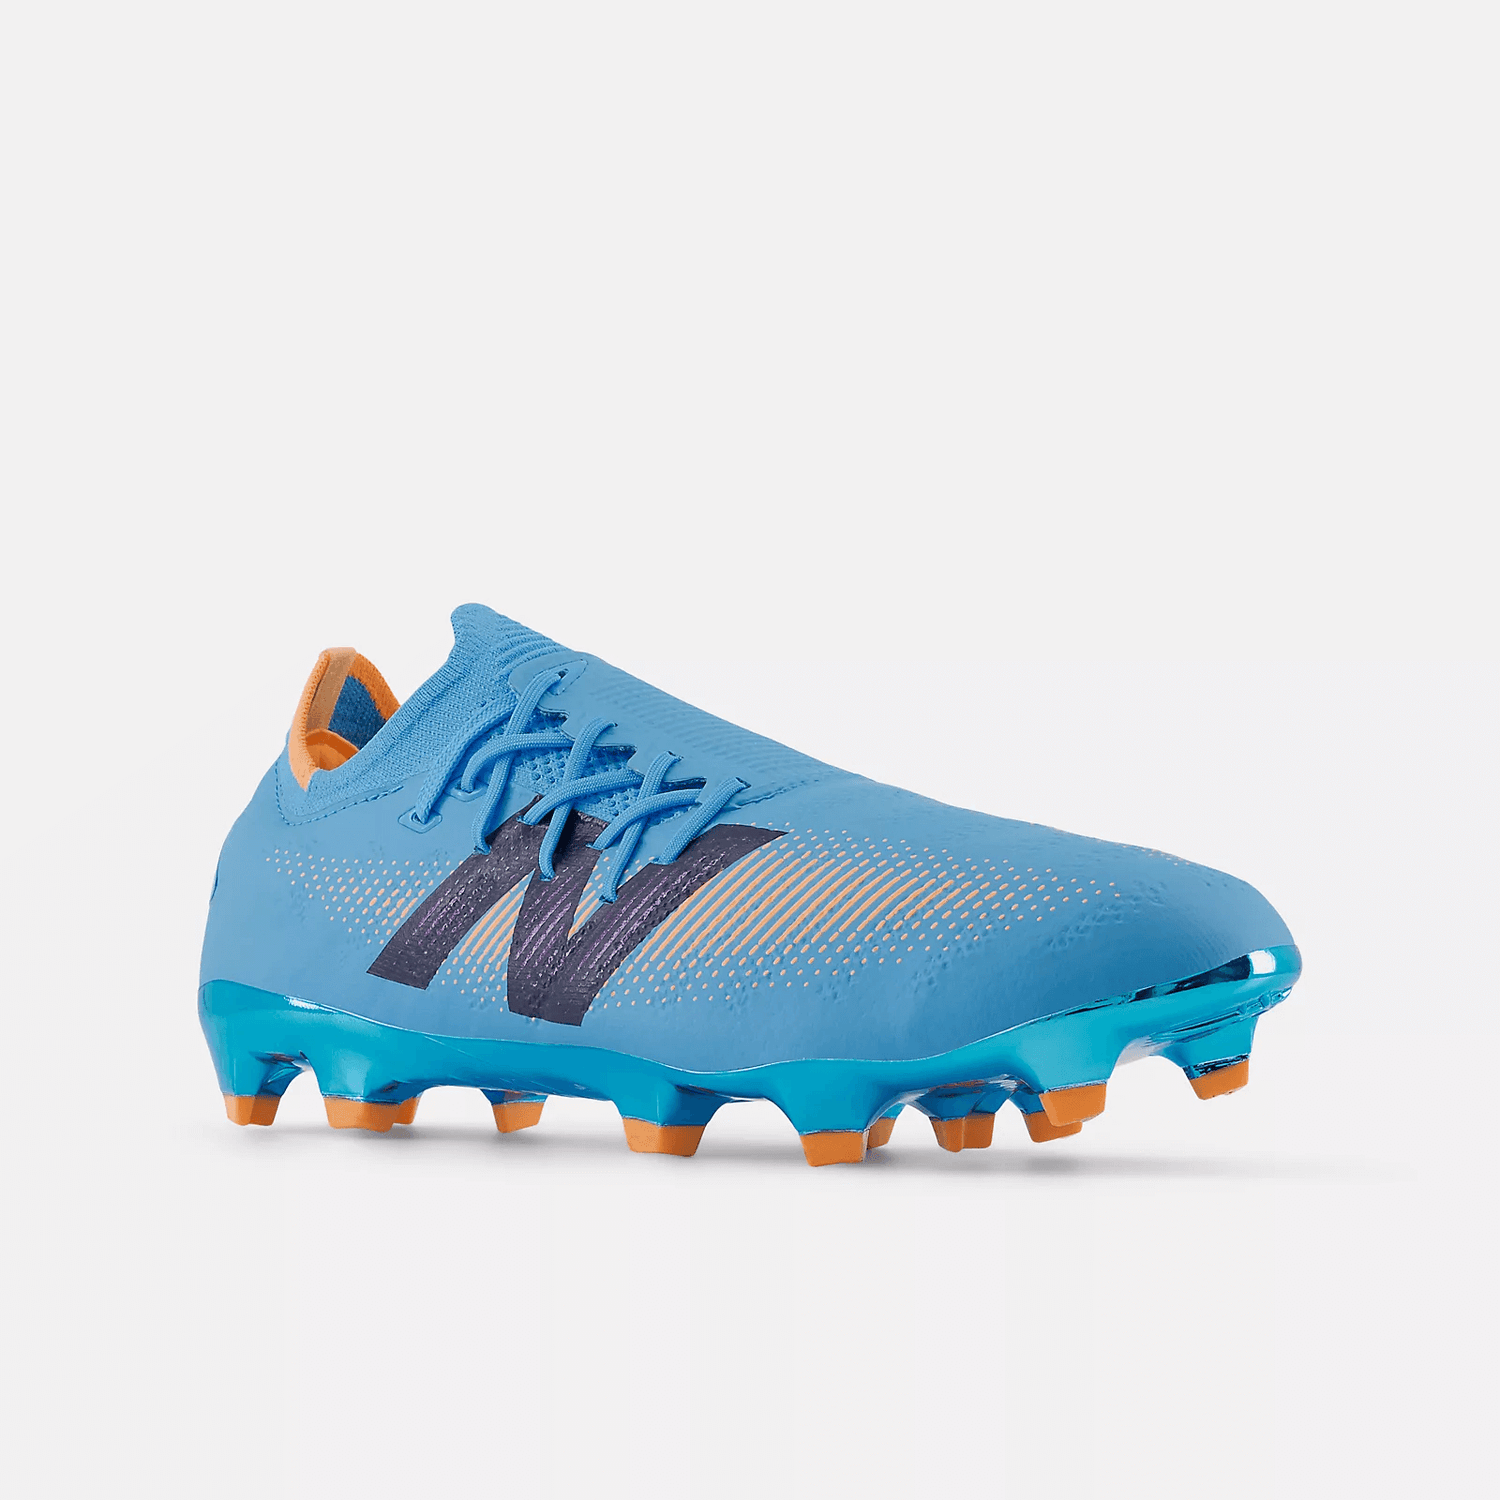 New Balance Furon Pro FG V7+ 2E Wide - Blue Pack (SP24) (Lateral - Front)